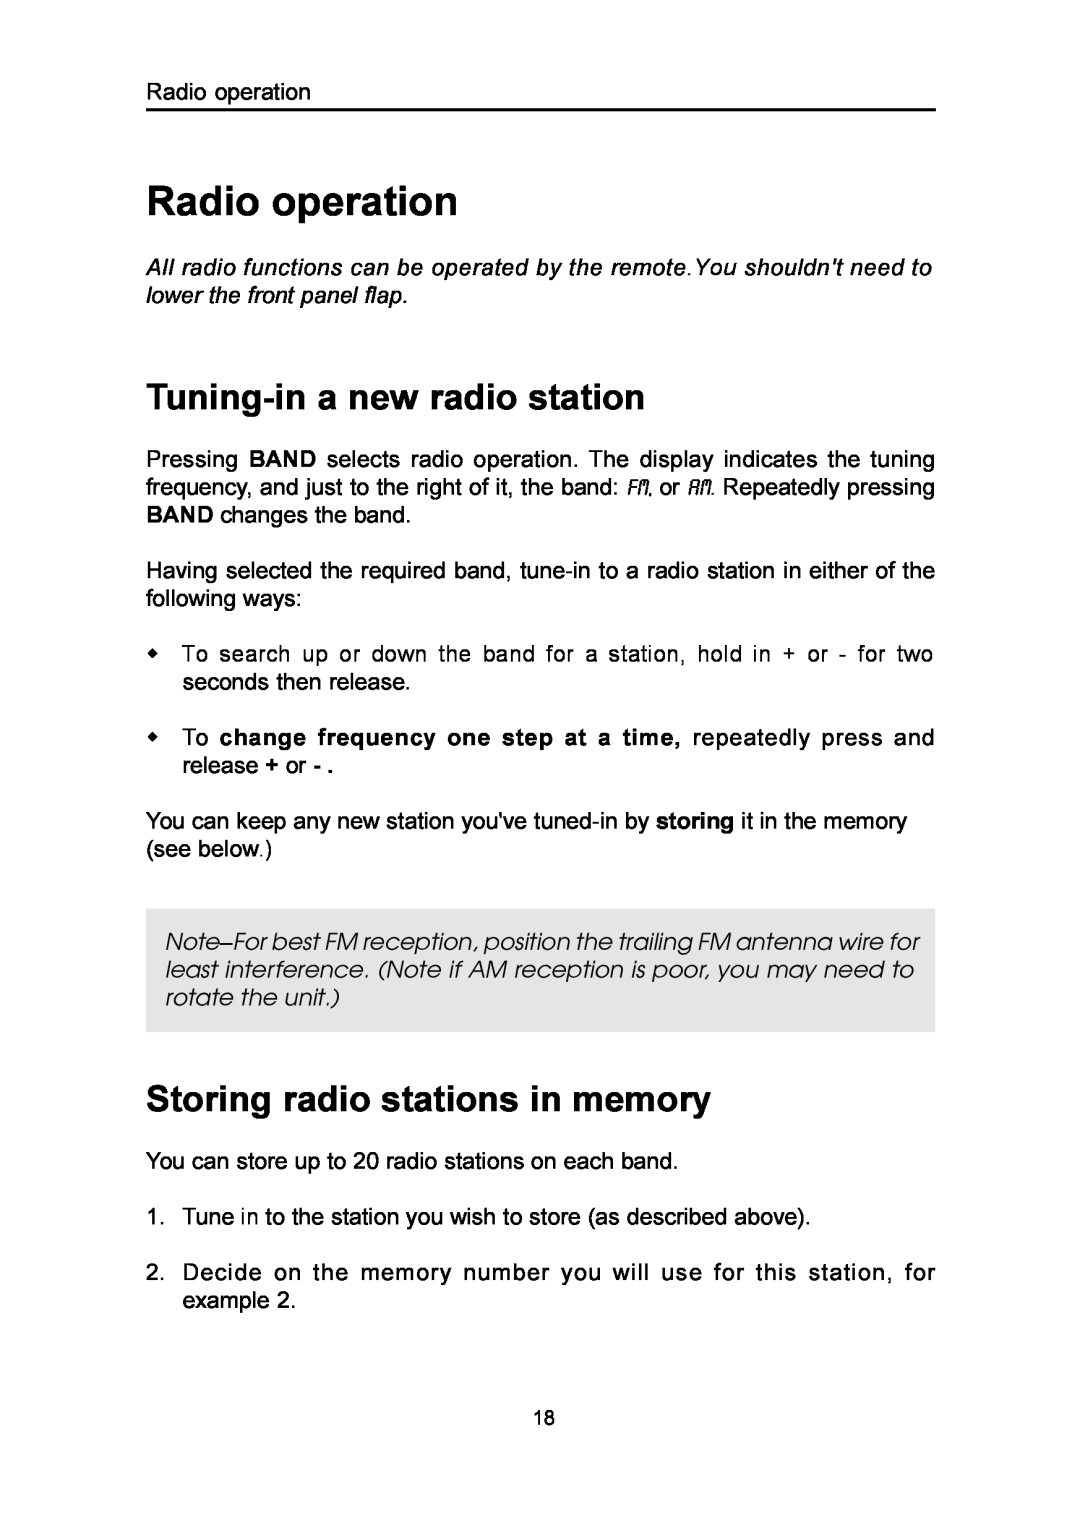 Emerson MS3100 owner manual Radio operation, Tuning-ina new radio station, Storing radio stations in memory 